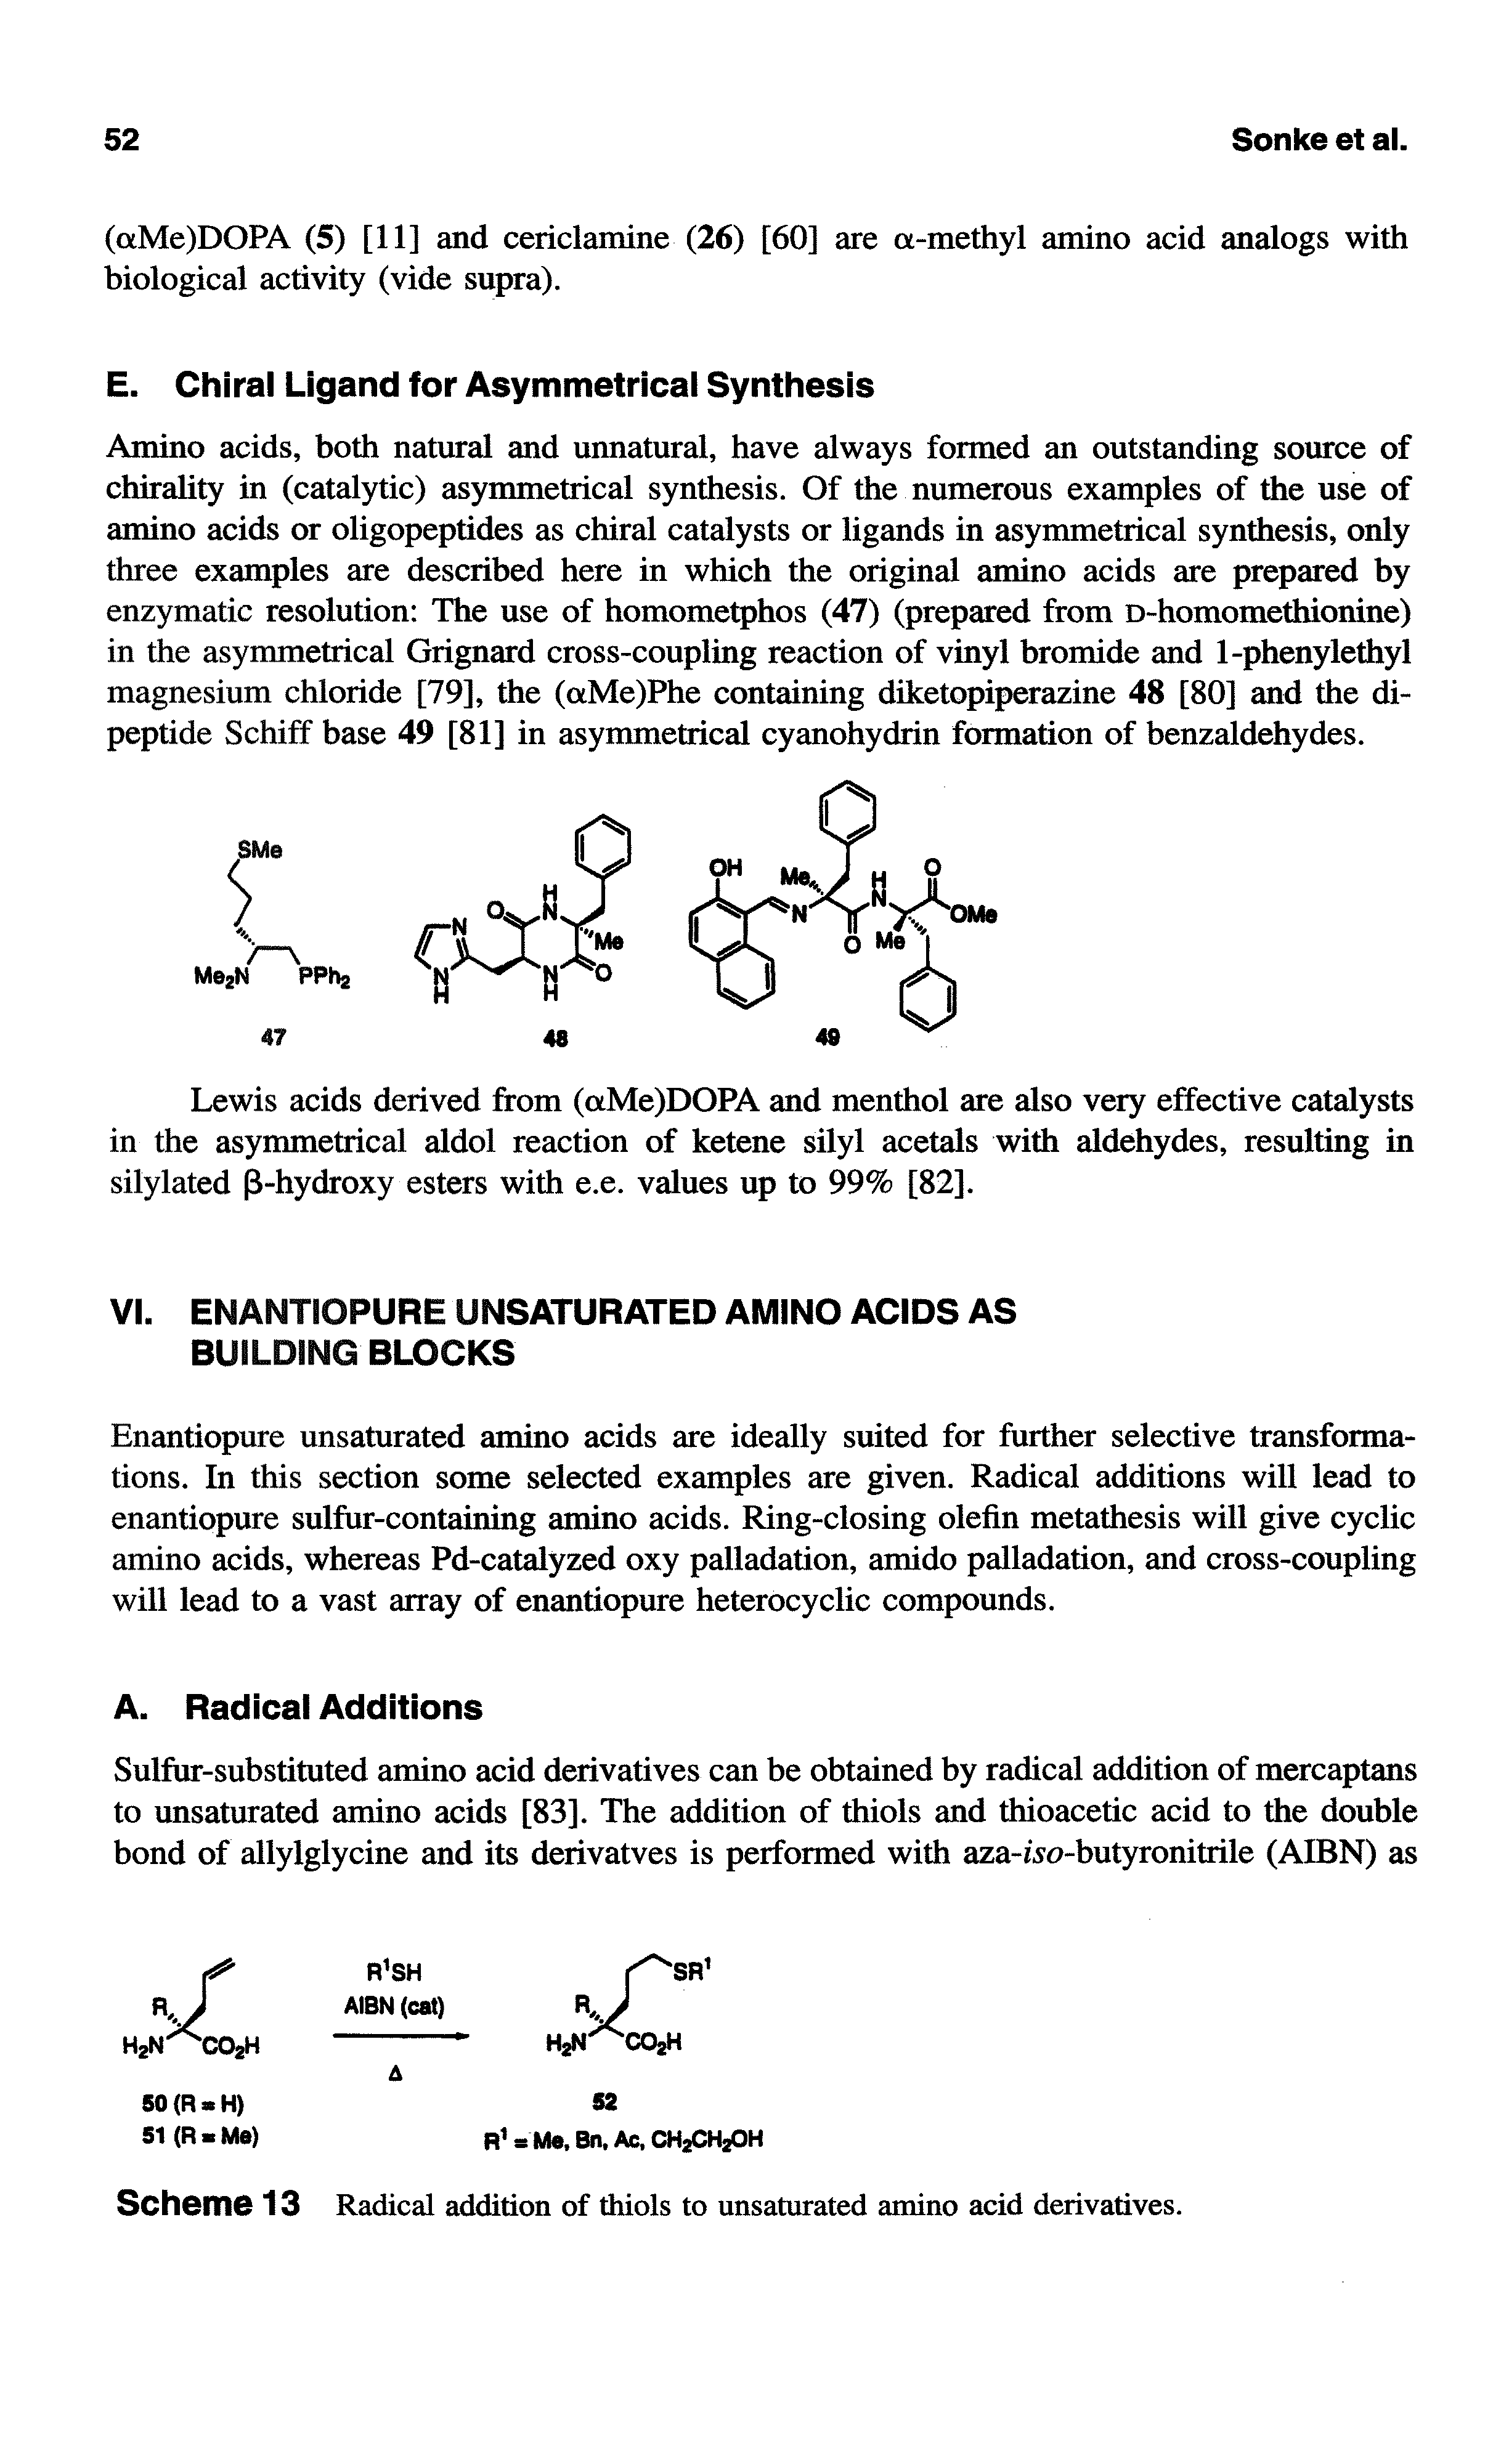 Scheme 13 Radical addition of thiols to unsaturated amino acid derivatives.